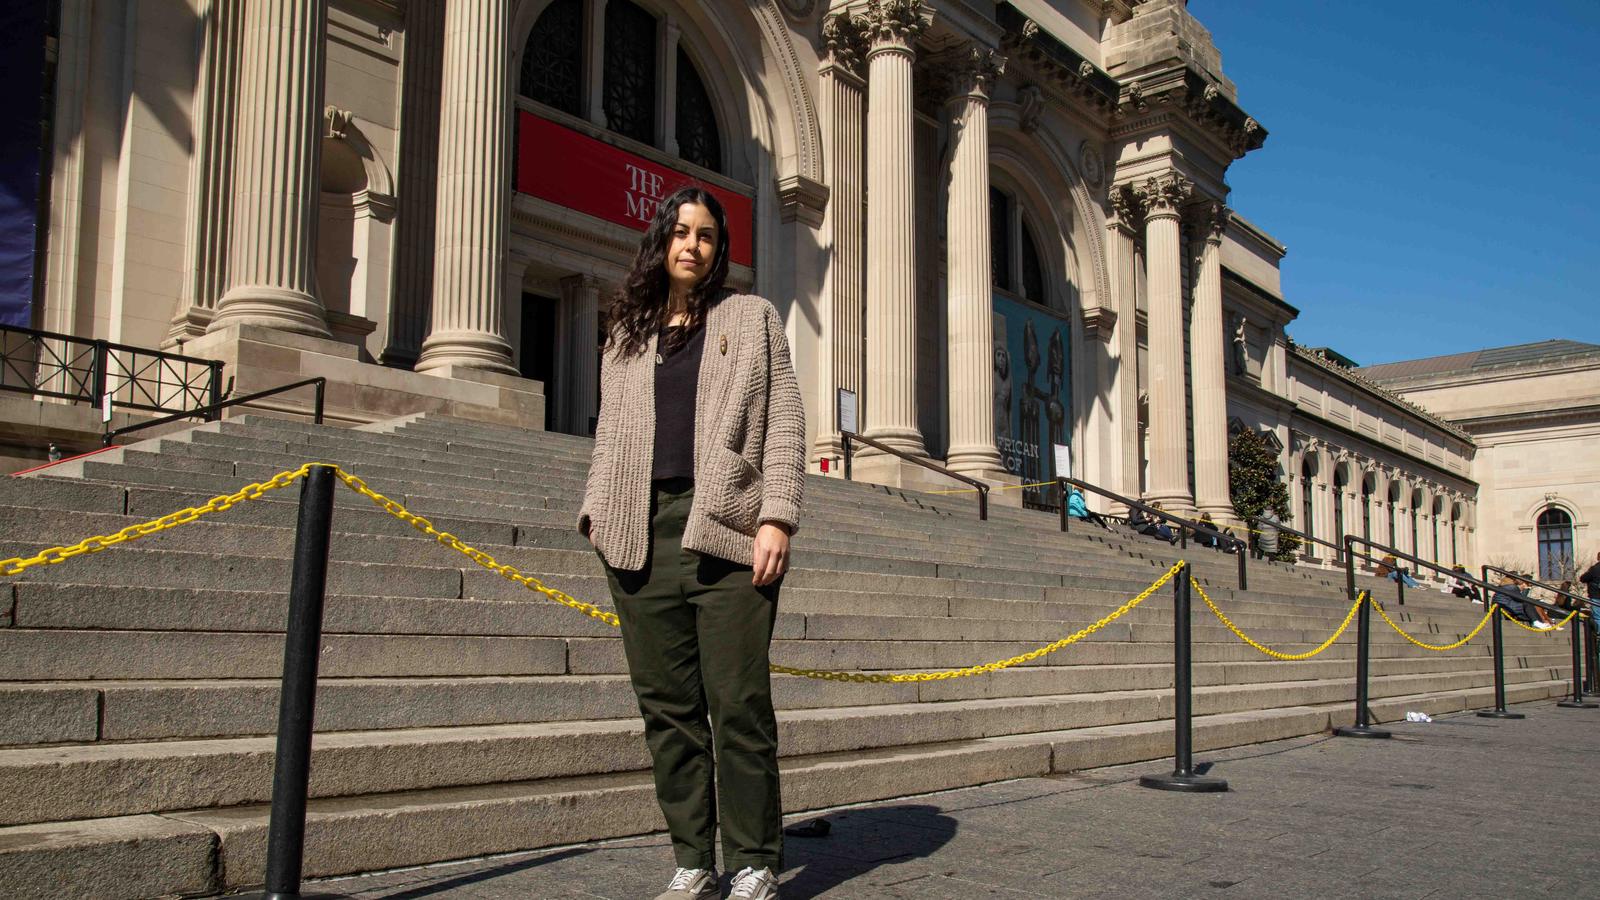 Capua standing outside of the Met's main entrance on 5th ave wearing a cardigan and army green pants.